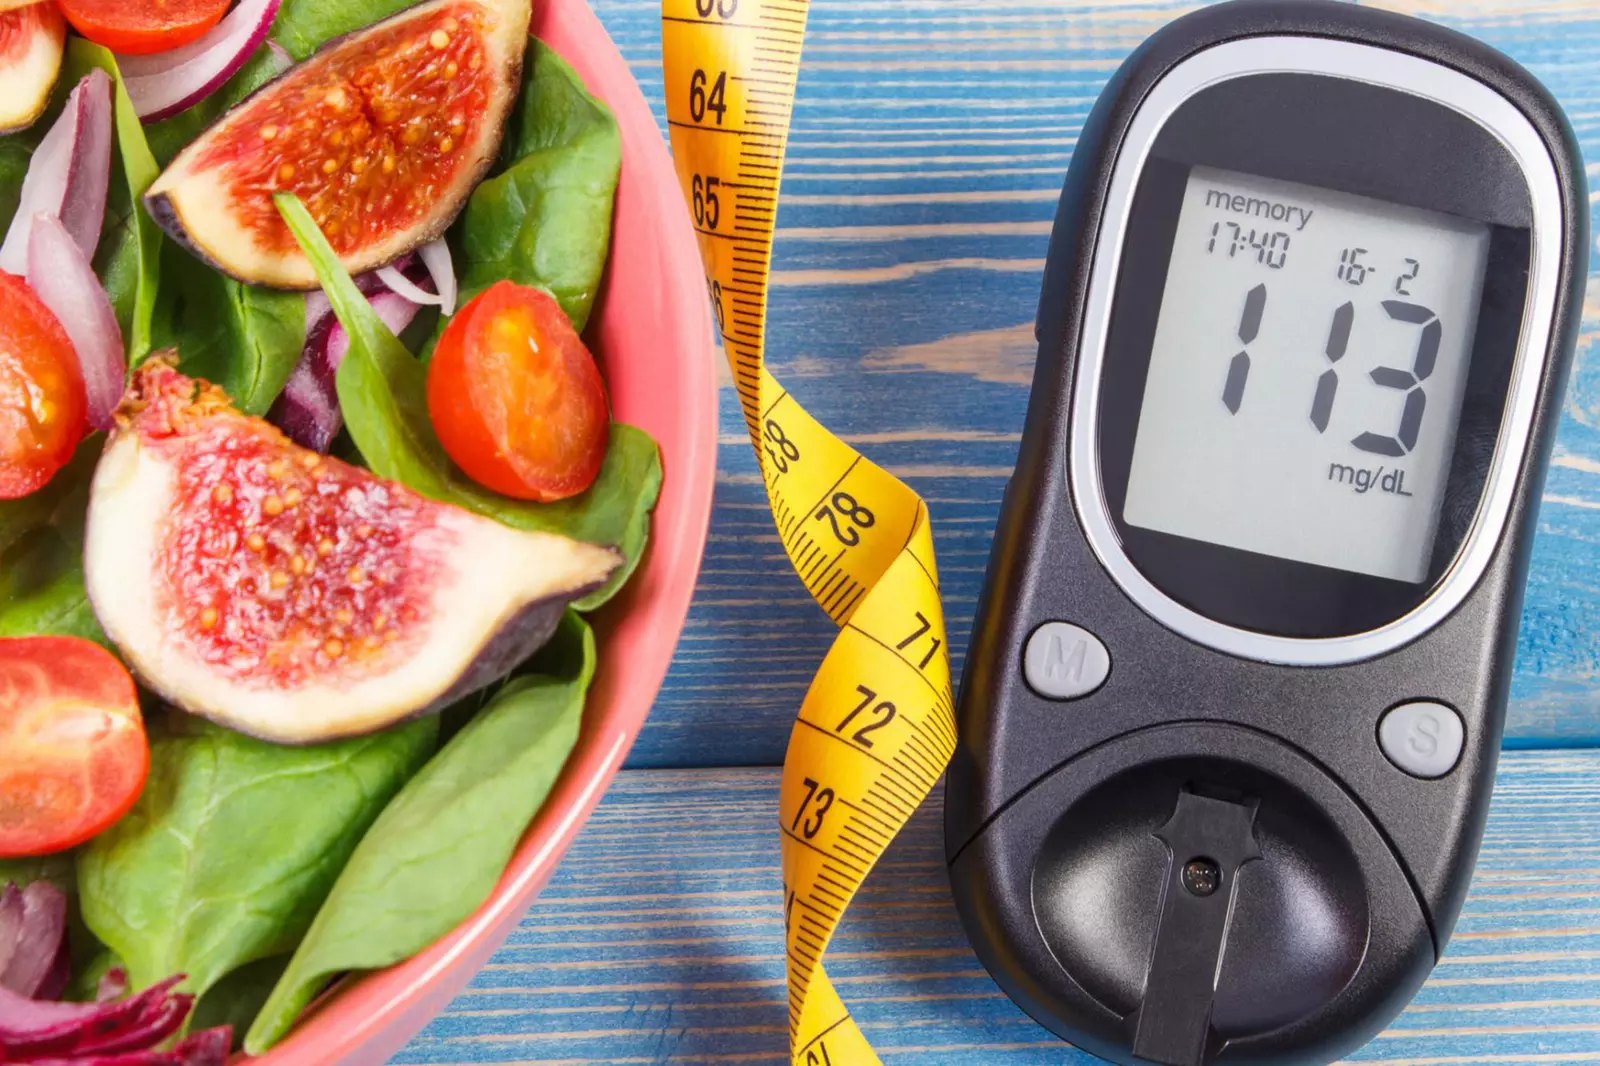 A picture of a salad, measuring tape, and a sugar monitor